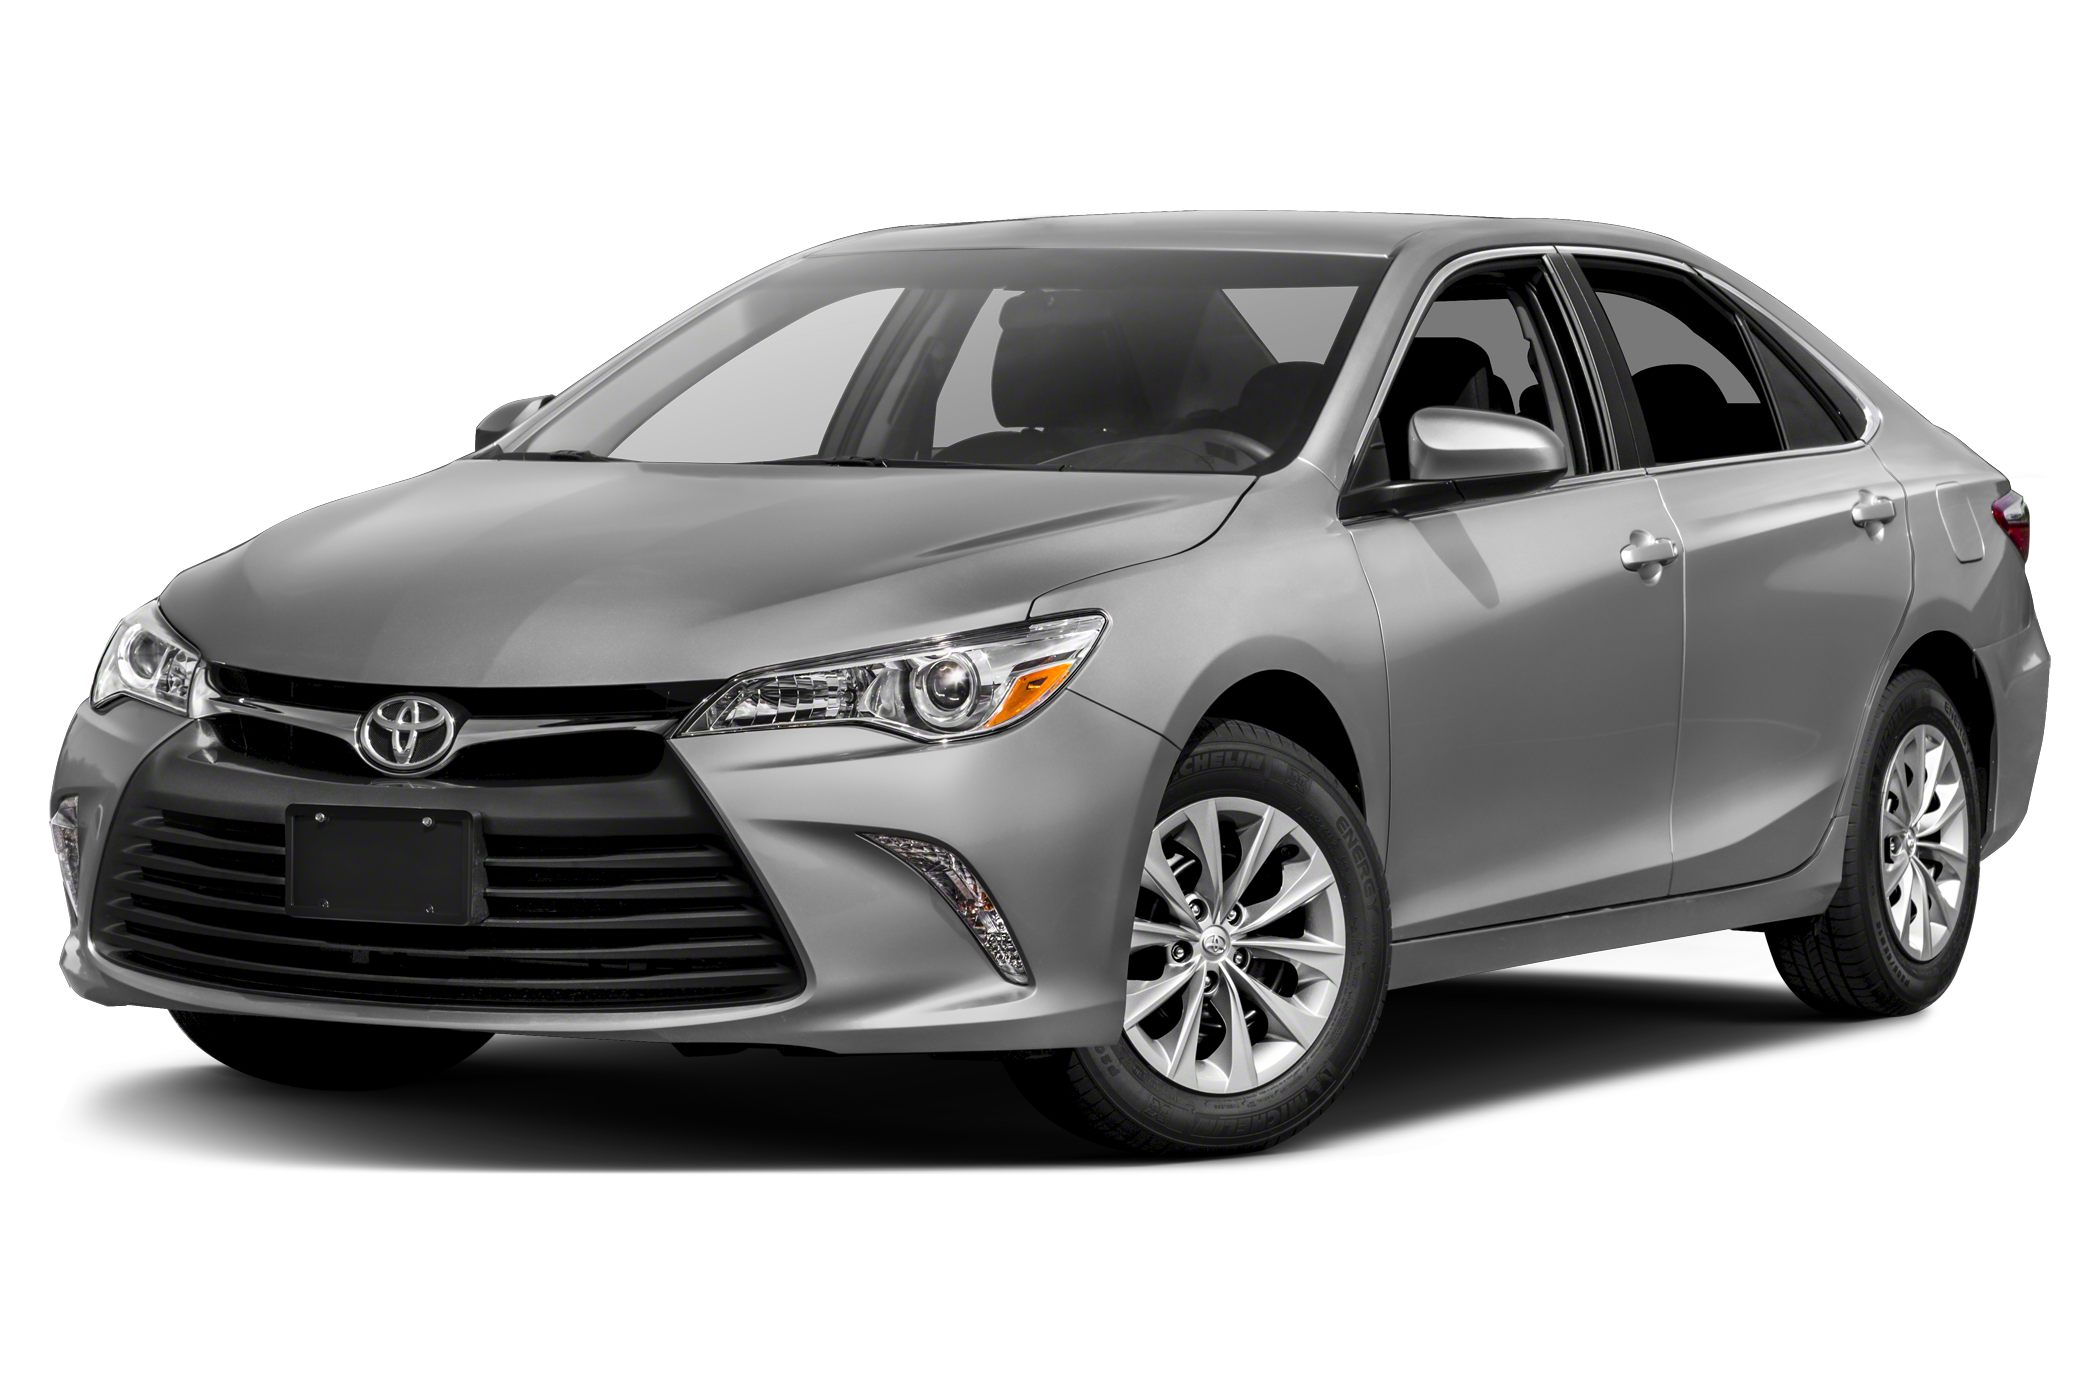 Images of Toyota Camry XLE | 2100x1386